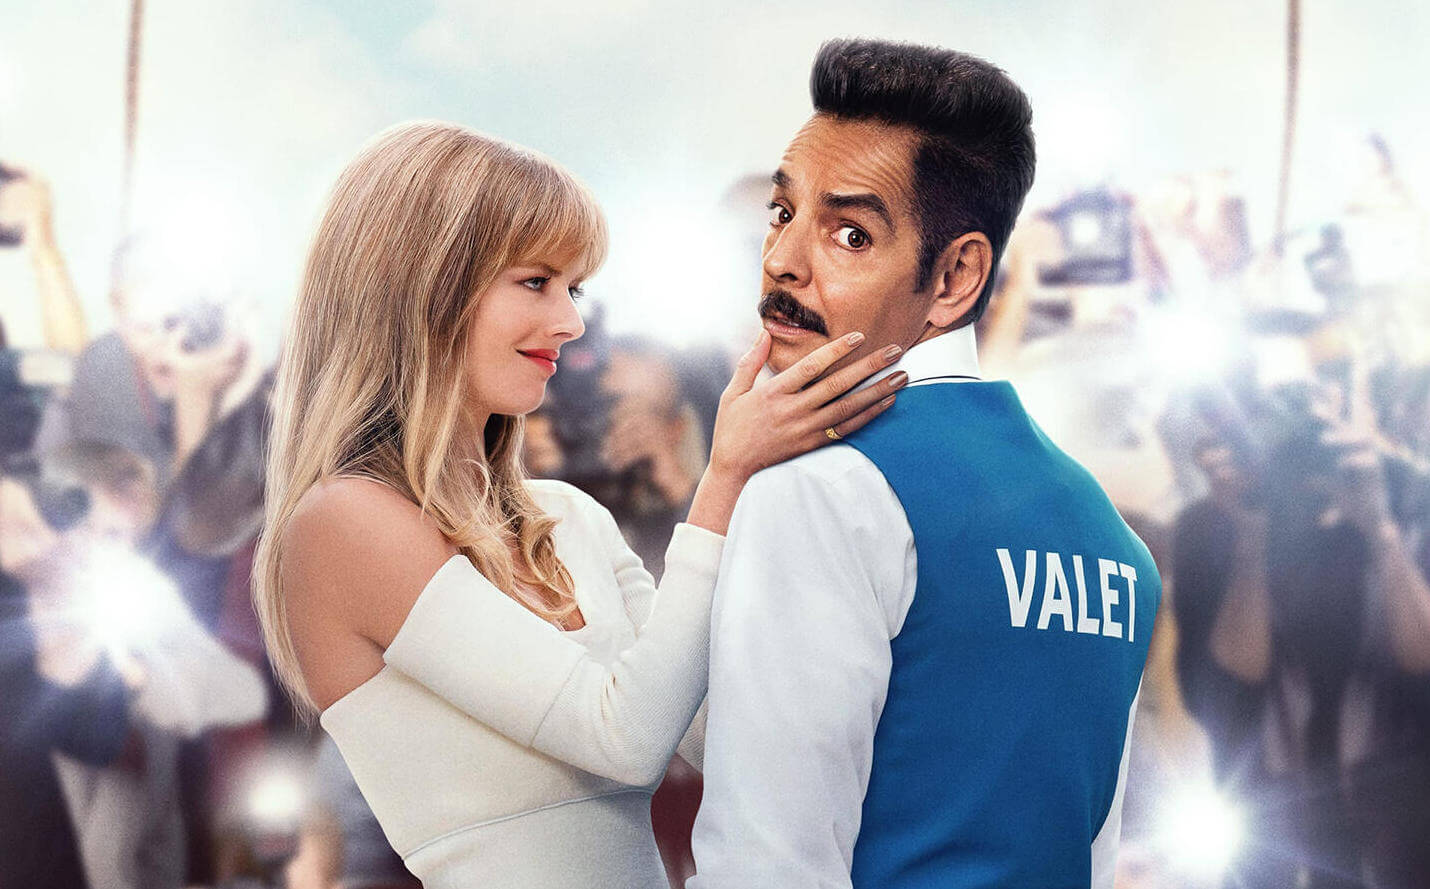 The-Valet-best-movies-on-hulu-in-canada